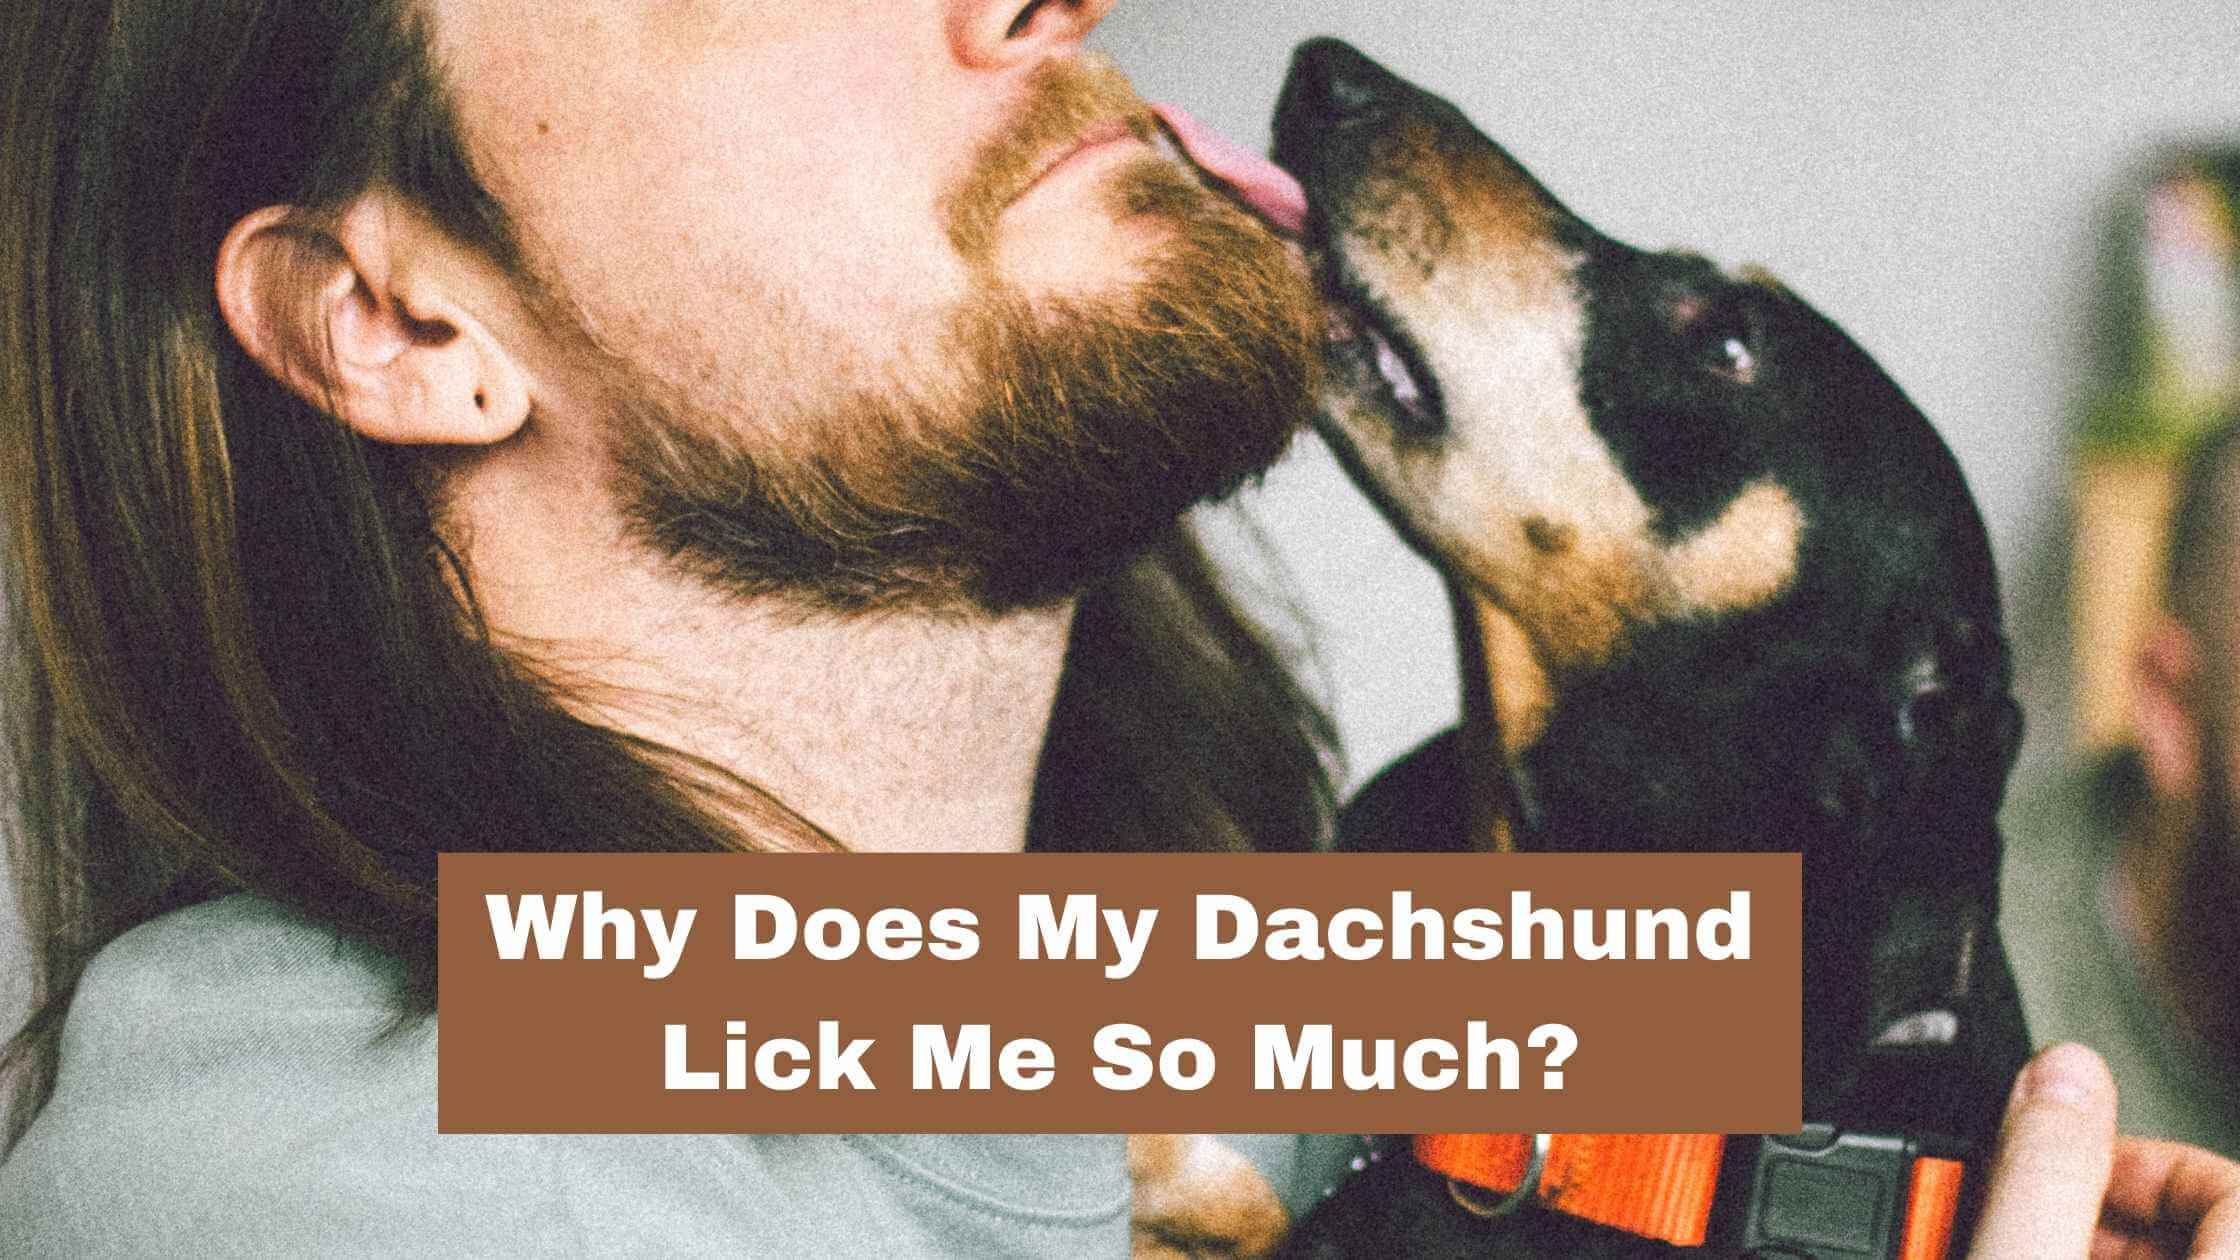 why do dachshunds like to lick